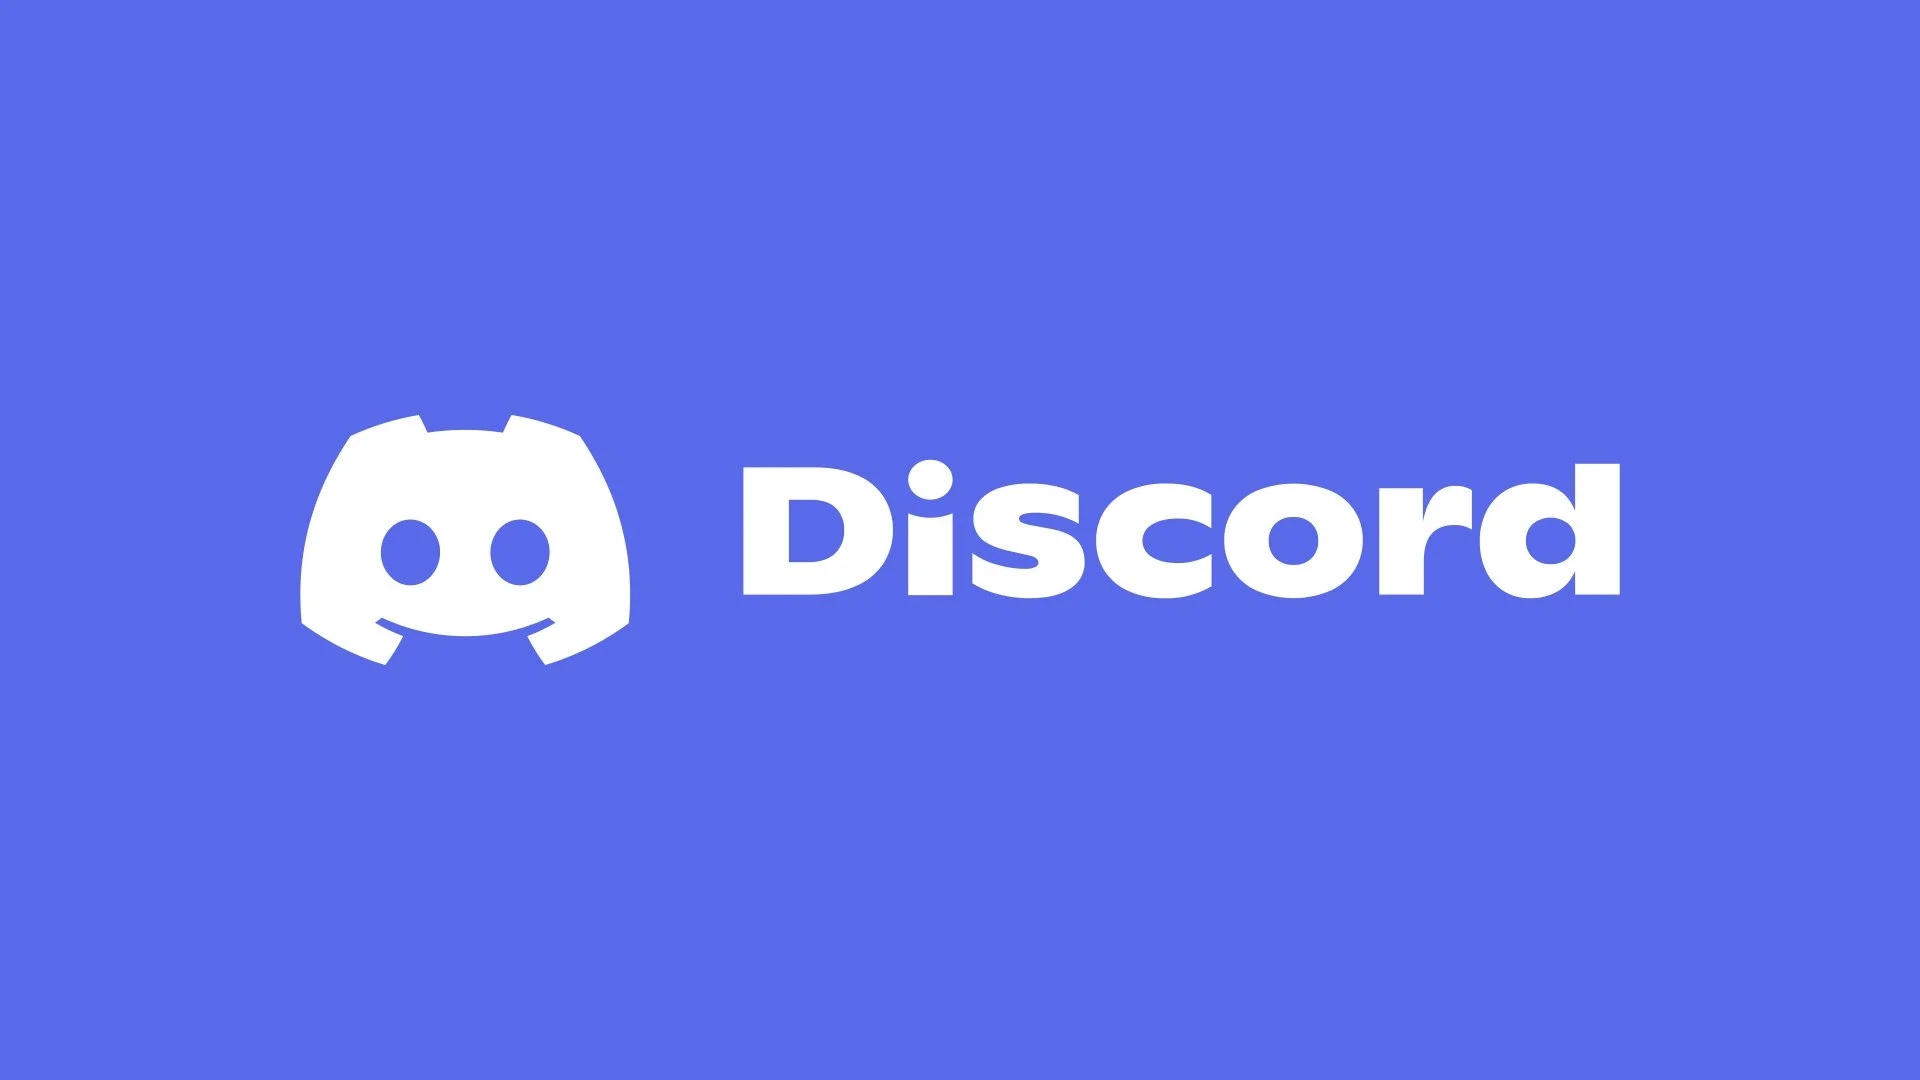 How To Get An Invisible Discord Name And Avatar?